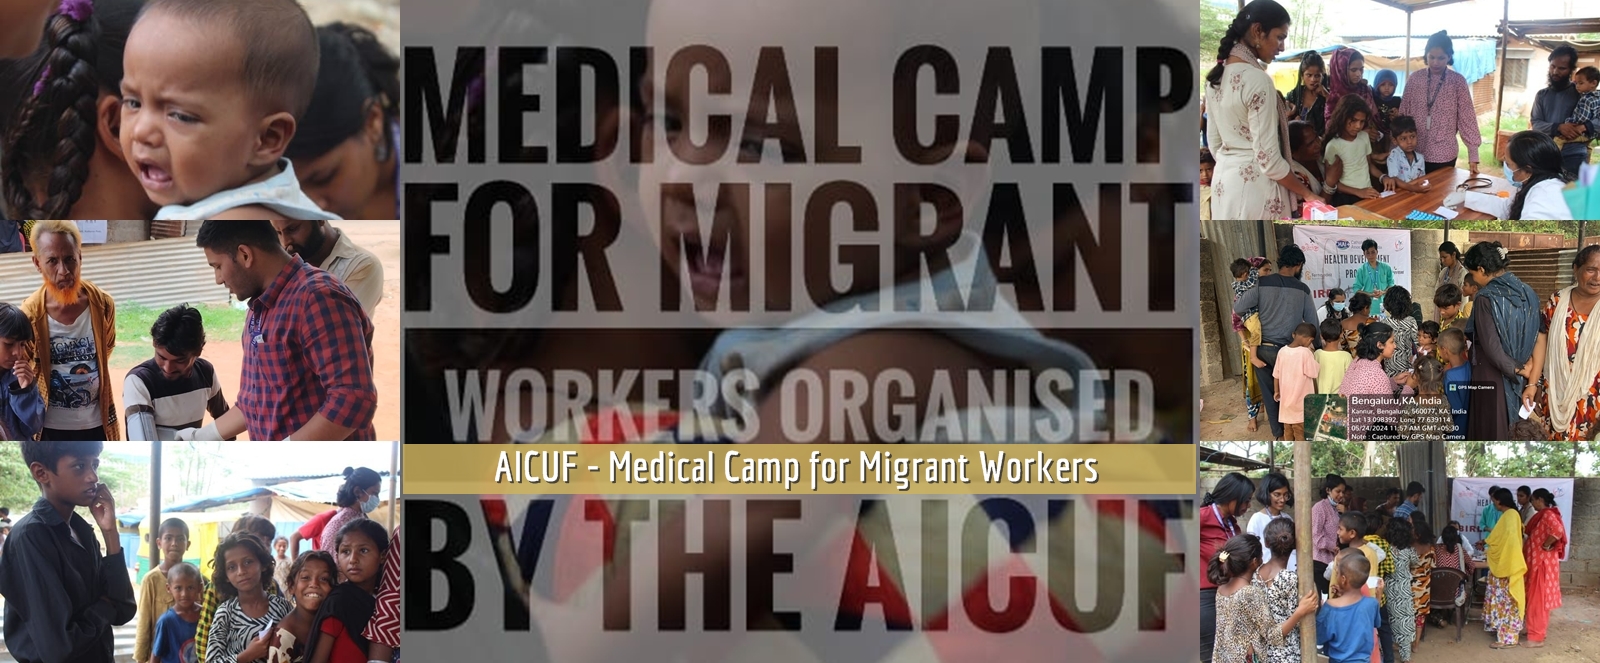 AICUF - Medical Camp for Migrant Workers

